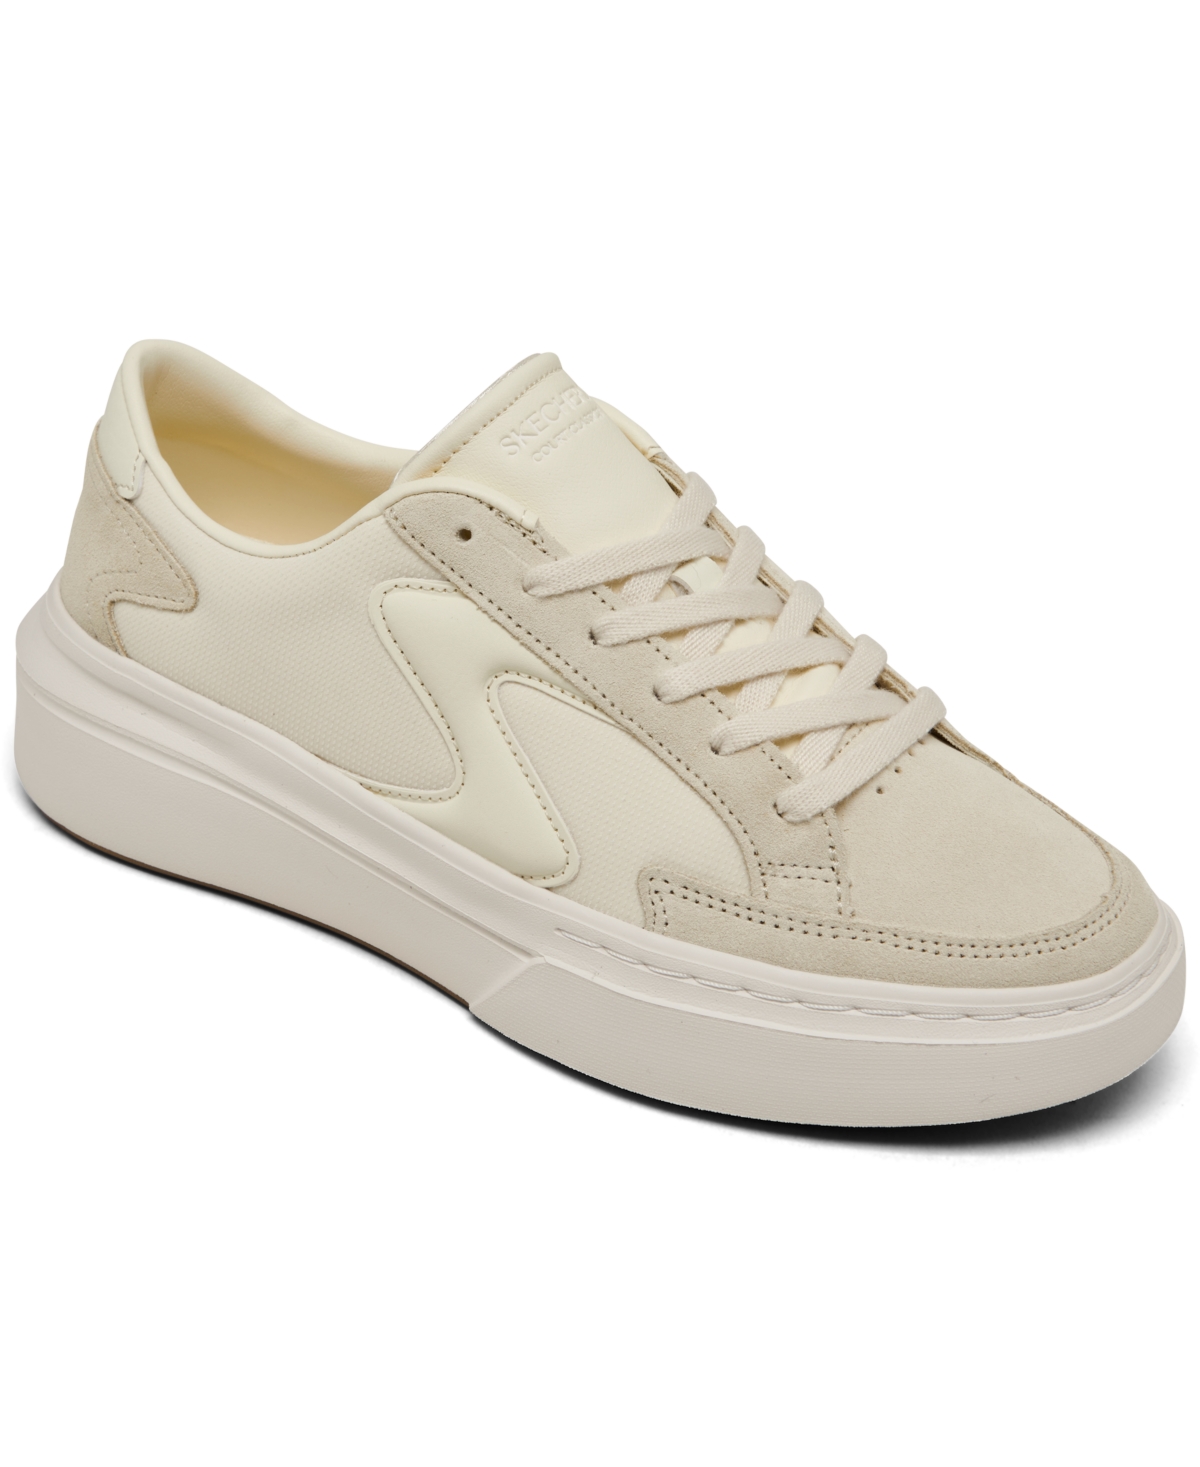 Women's Cordova Classic - Game Time Casual Sneakers from Finish Line - Off White